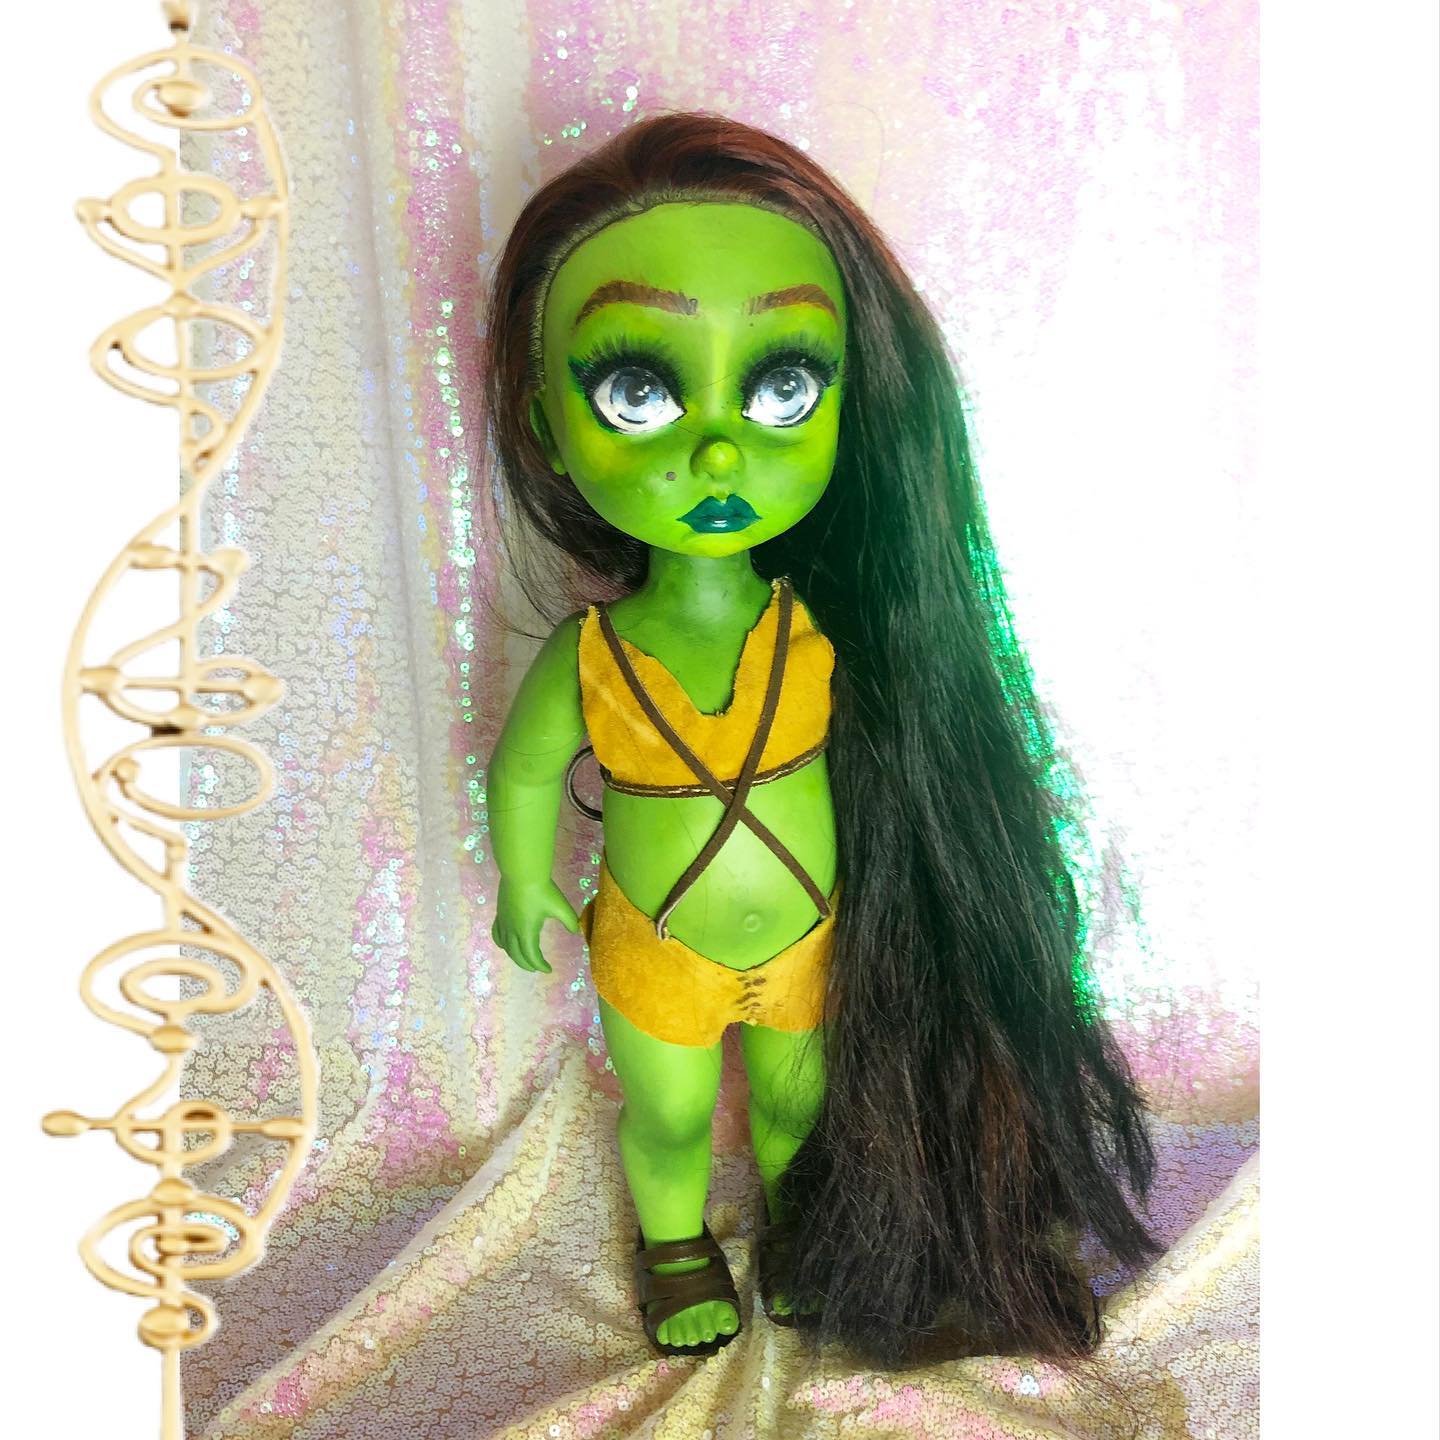 A completed commission ready to ship off to her new home. 
An Orion “slave girl” who started her life as a Rapunzel before her hair dye and repaint 🖖🏻💚👽